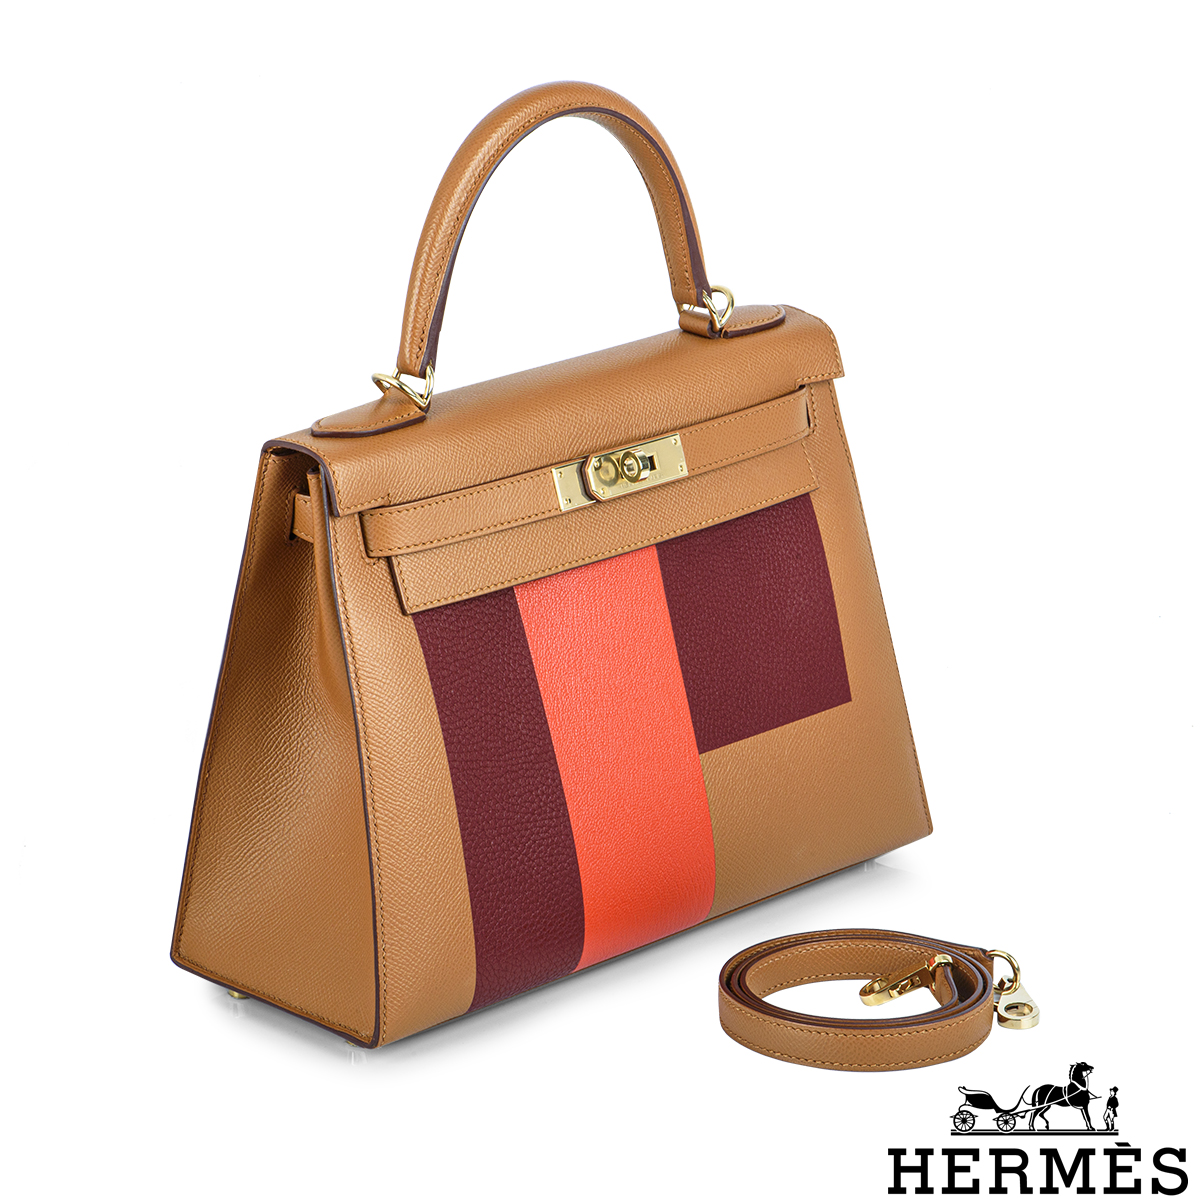 LoVey Goody - 🧡Brand New Hermes Kelly 25 Cognac Ostrich Sellier in Gold  Hardware Comes full set with receipt WhatsApp us at +60123288255 for more  info #hermeskelly25 #kelly25 #kelly25ostrich #kelly25cognacpstrichghw  #hermesauthentic